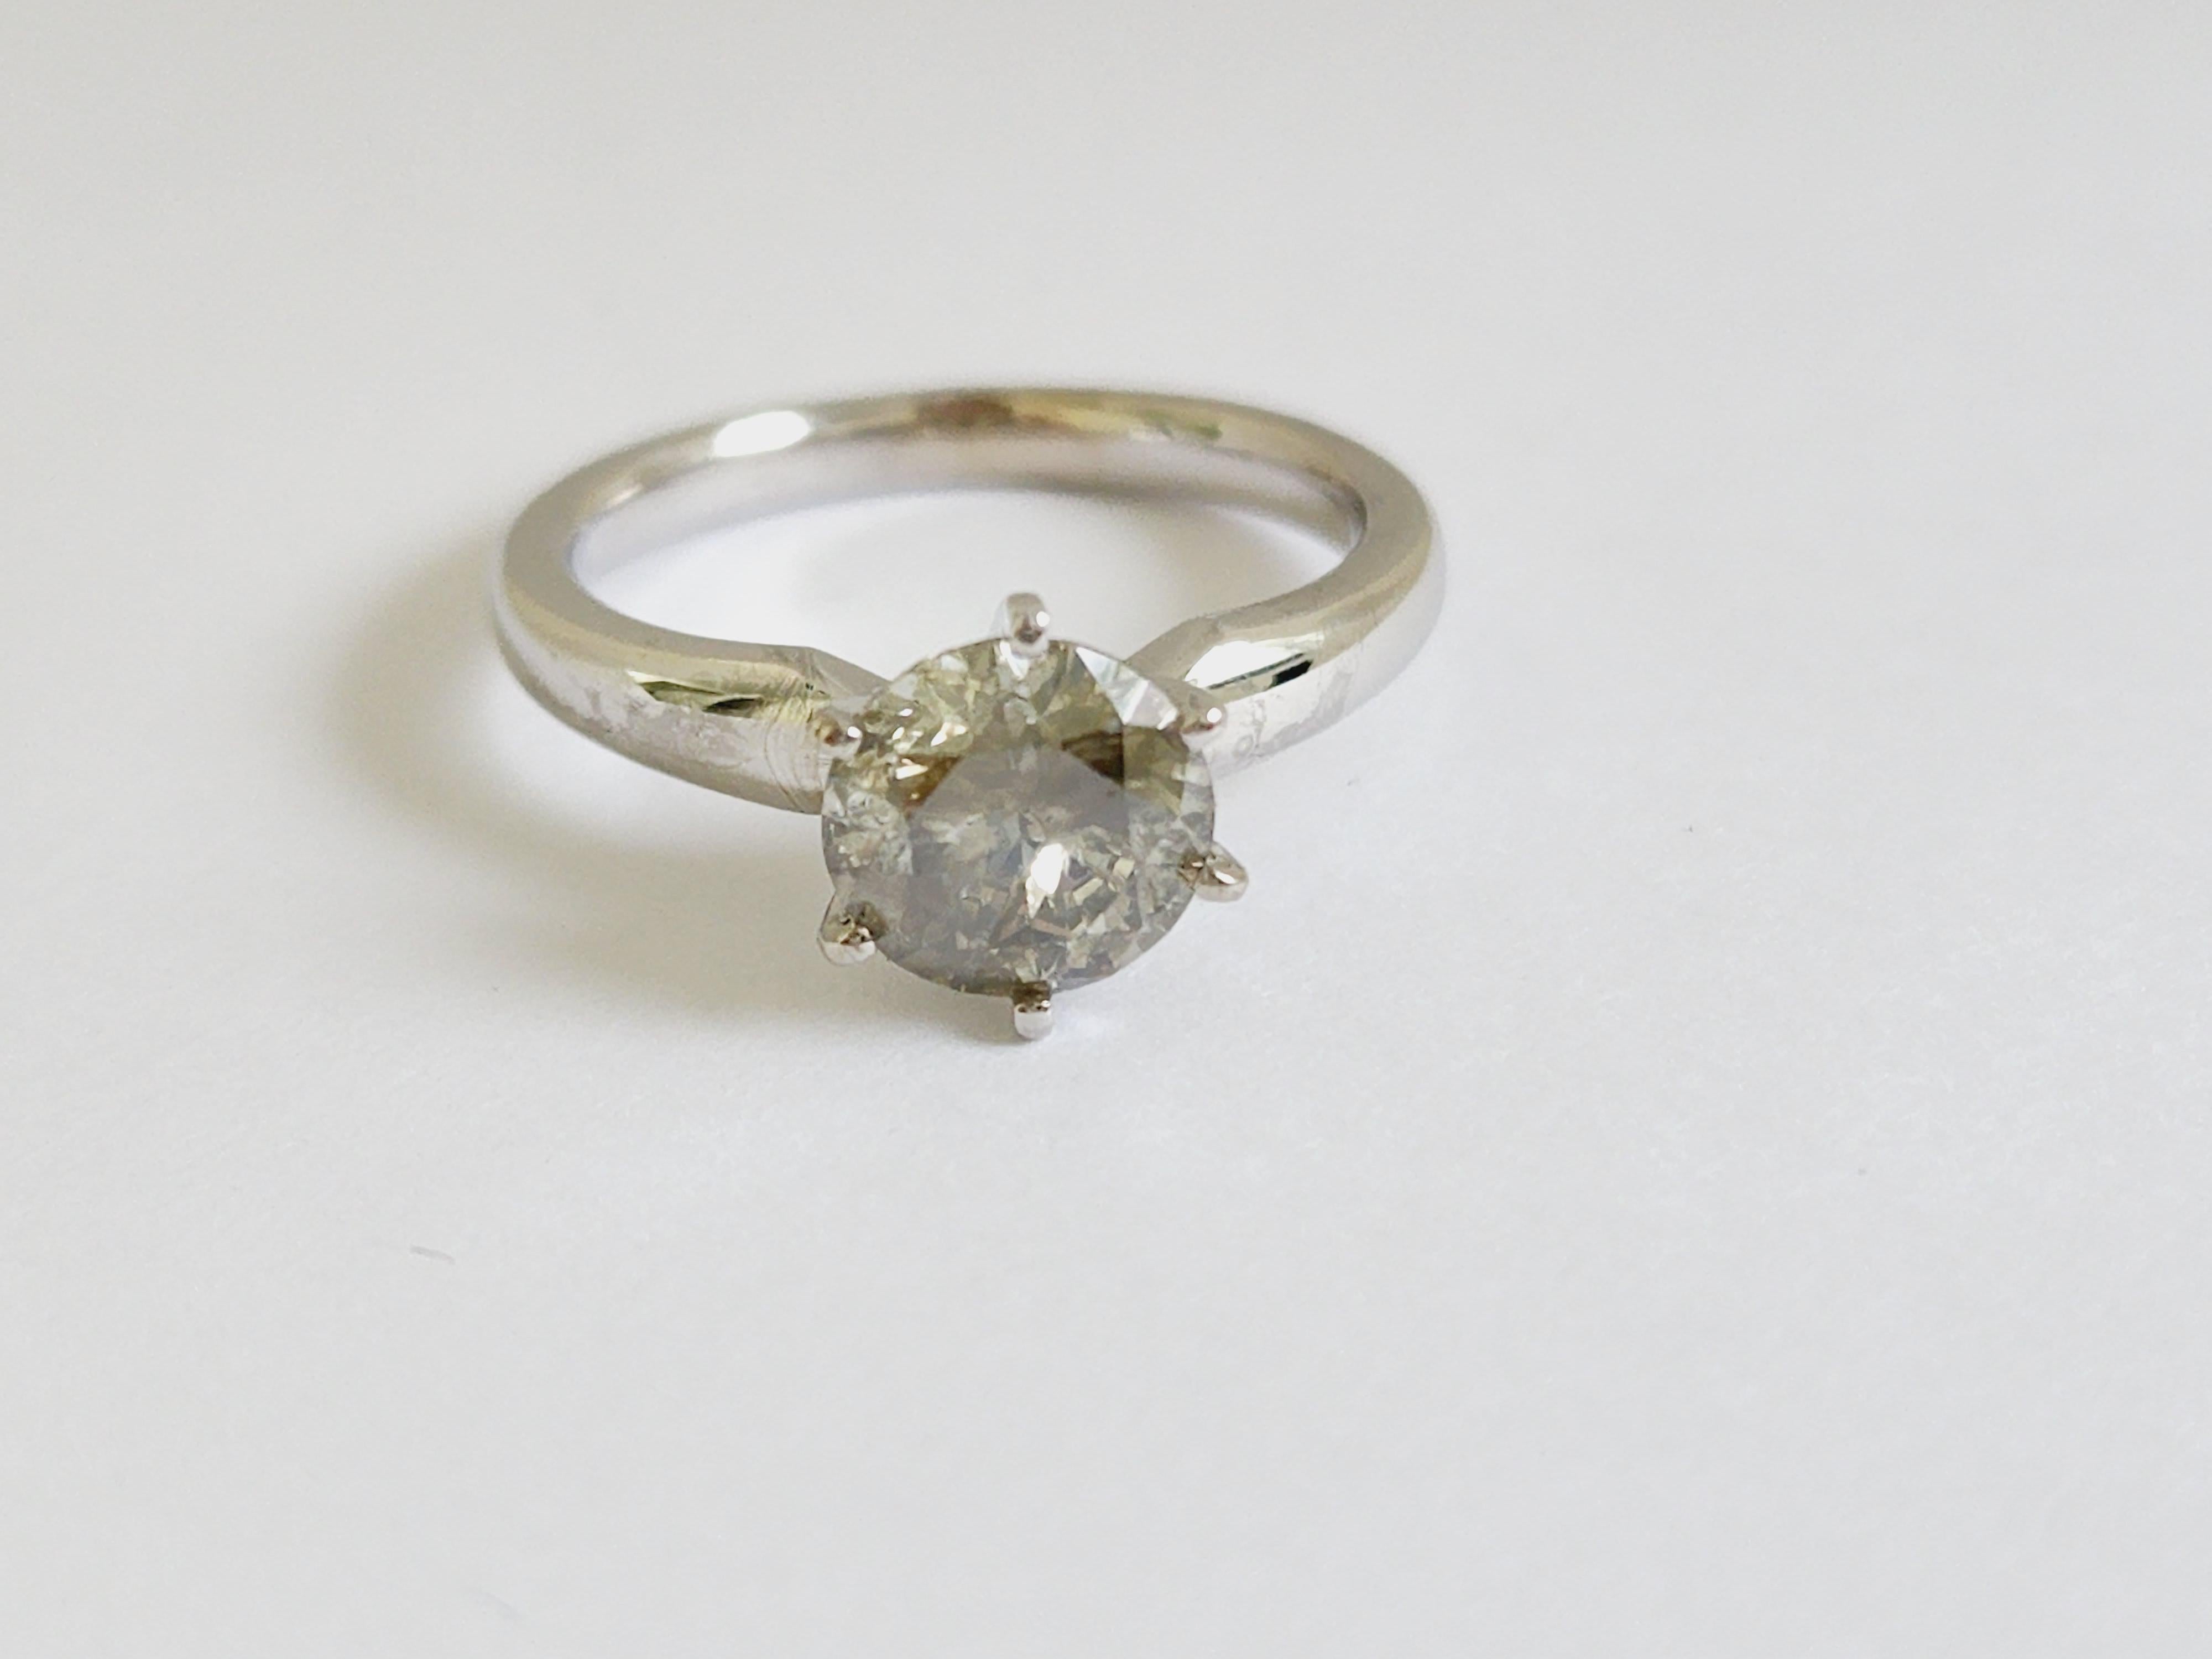 1.75 Carat Round Cut Fancy Color Diamond White Gold Ring 14k In New Condition For Sale In Great Neck, NY